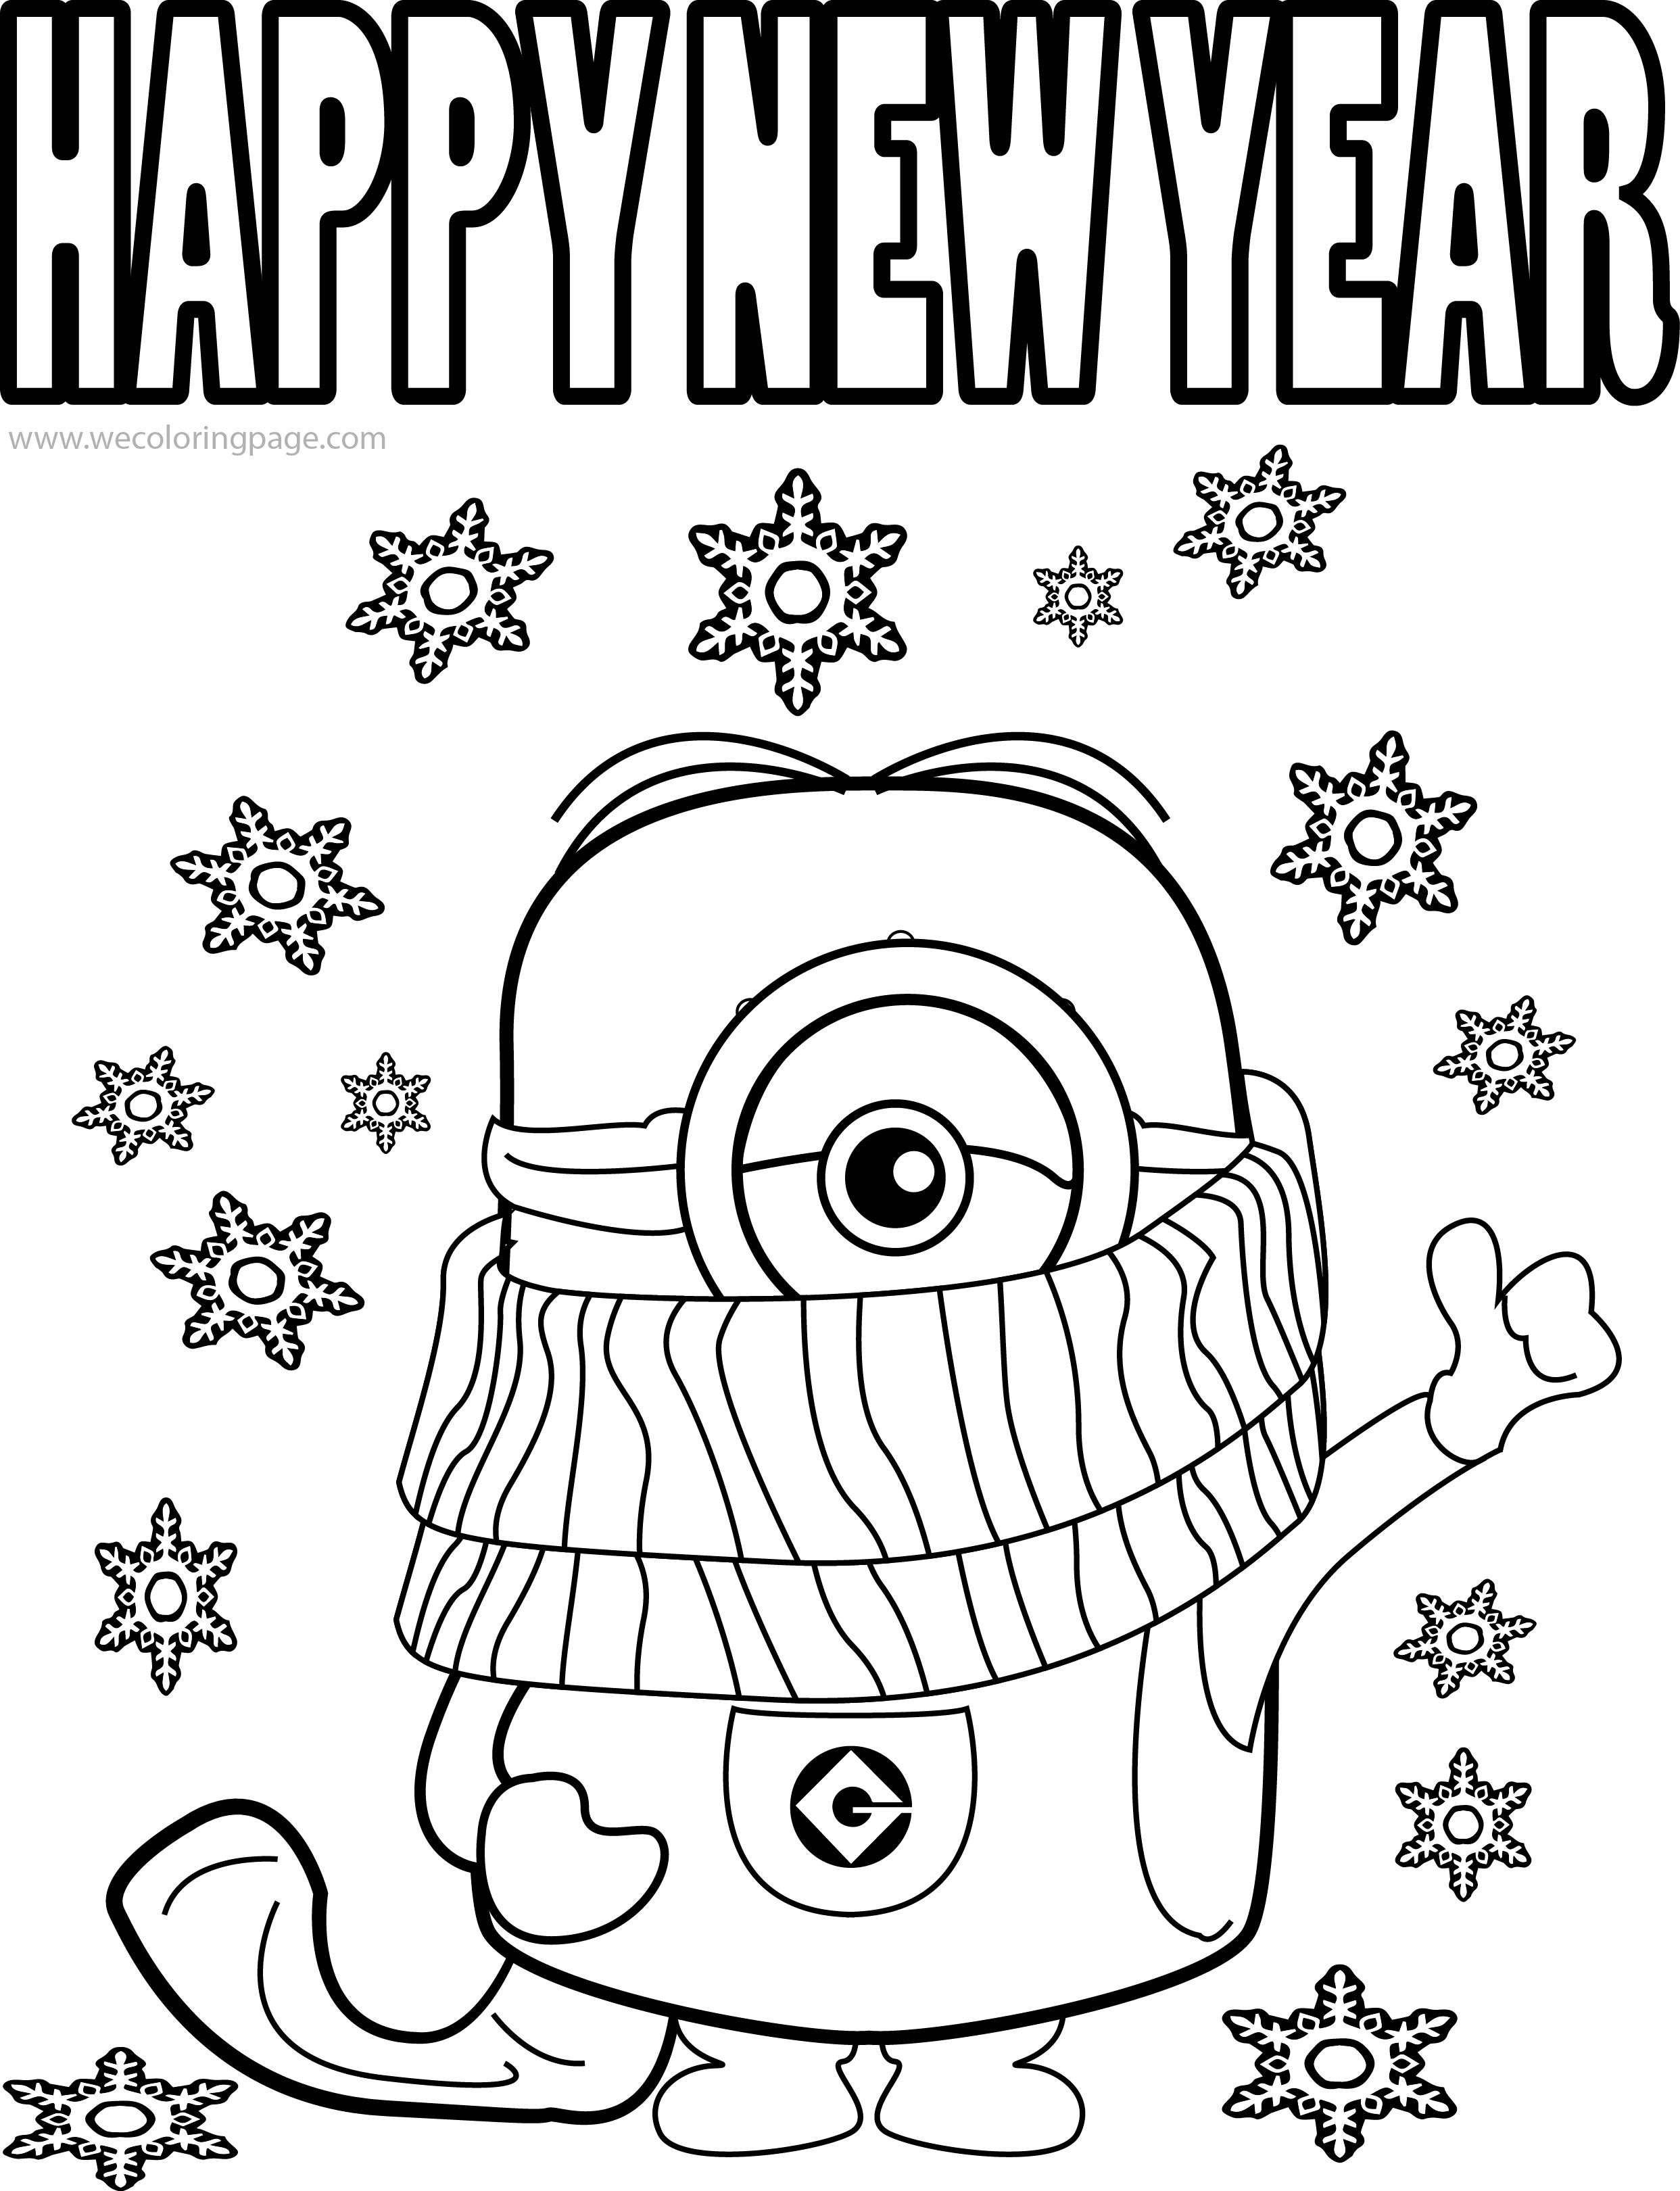 2019 Coloring Pages For Kids
 Happy New Year 2019 Coloring Pages HD Printable s